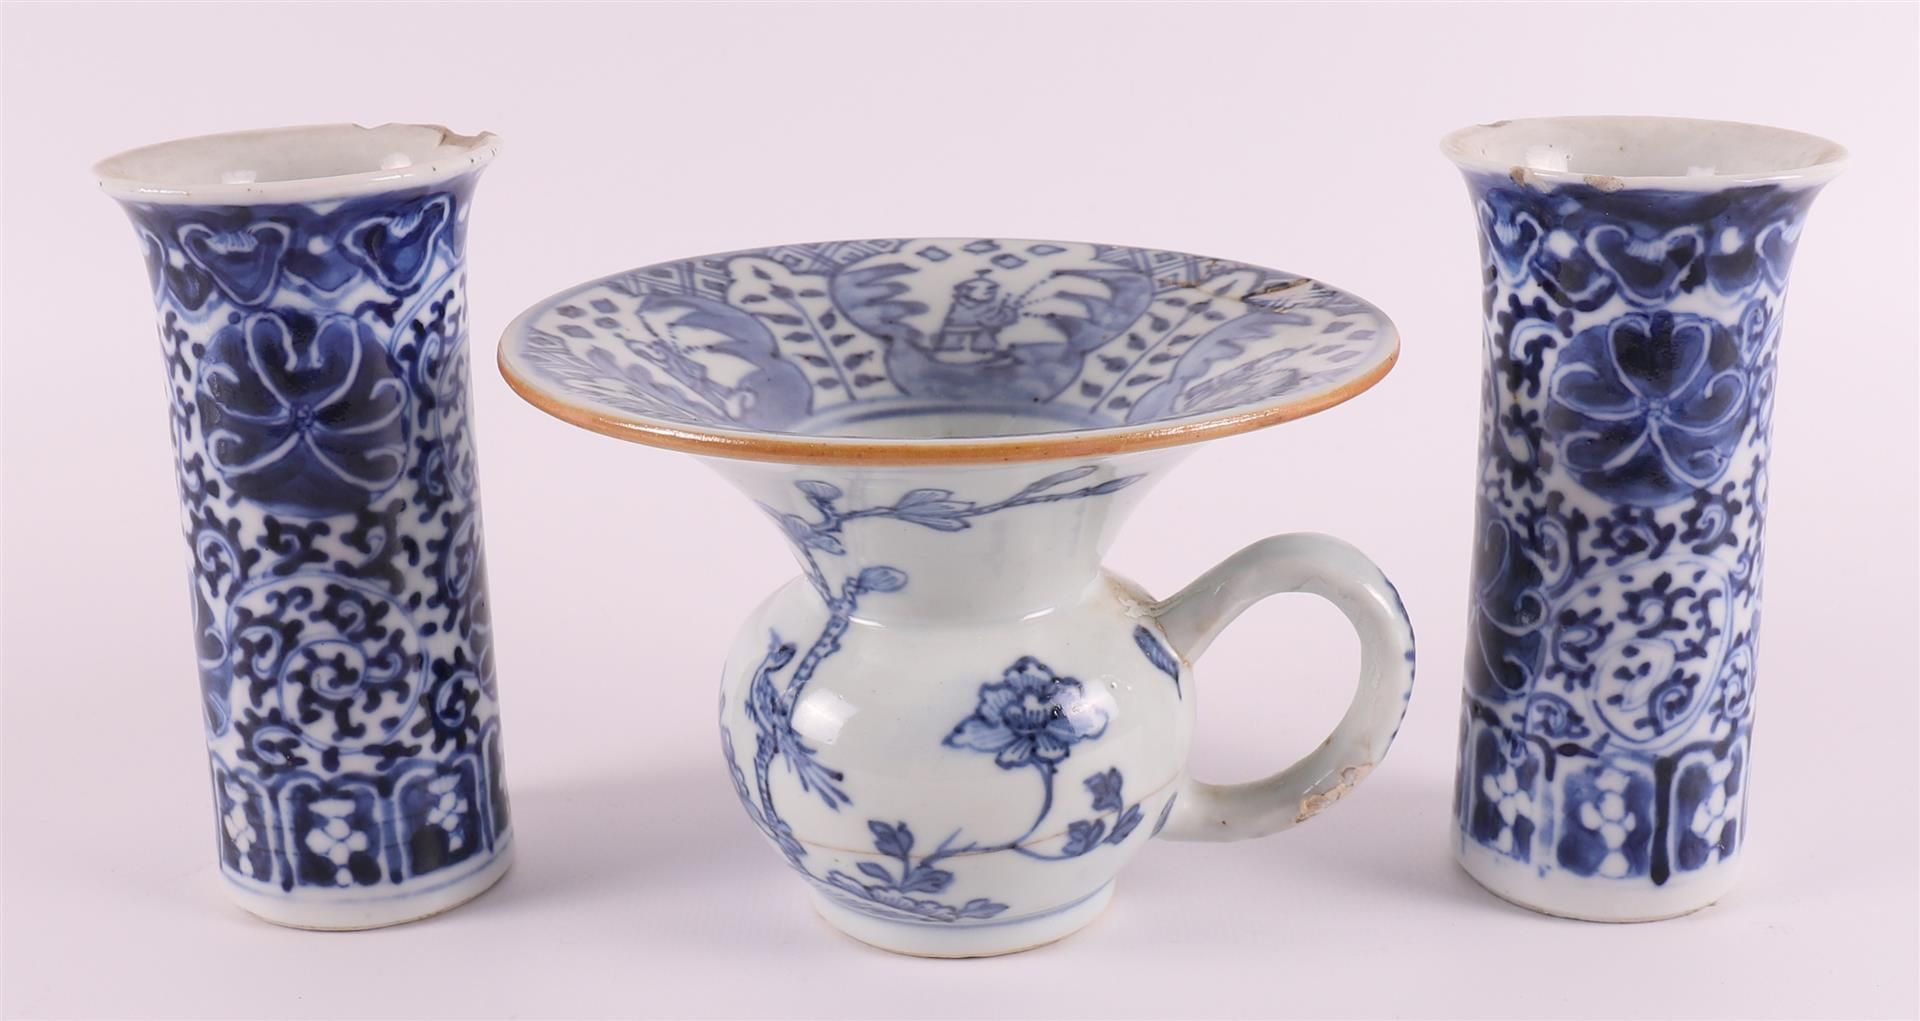 A blue/white porcelain spittoon, China, Qianlong 18th century, h 13 cm (restored). Here are two